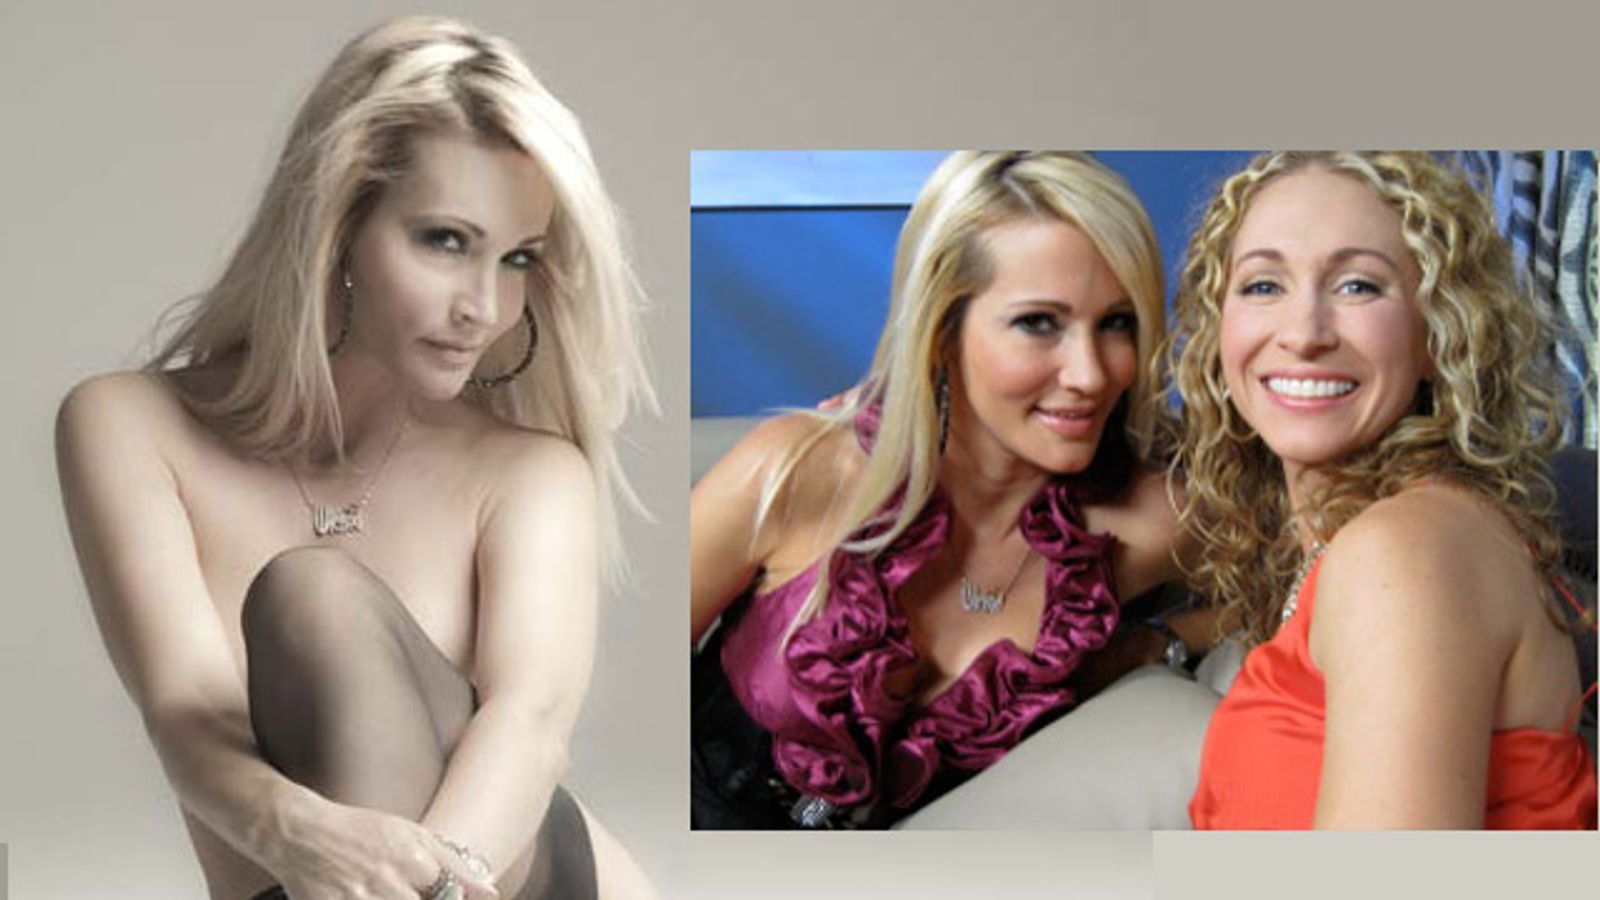 Jessica Drake to Do 'Girl on Girl' With HDNet's Katie Daryl